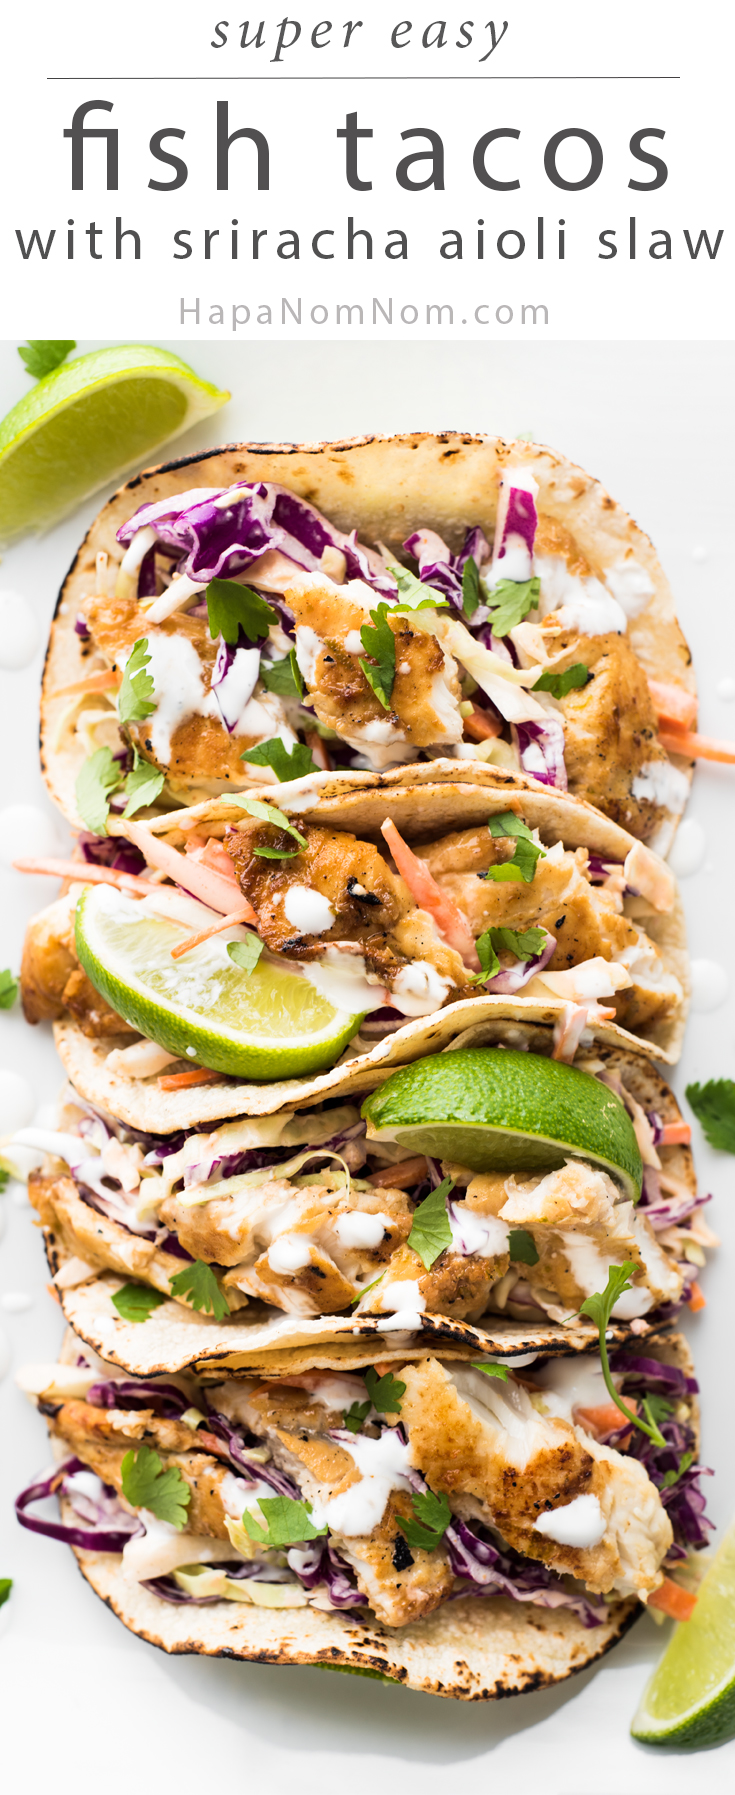 A perfect meal - these Fish Tacos with Sriracha Aioli Slaw are light, packed with flavor, and super easy to make!